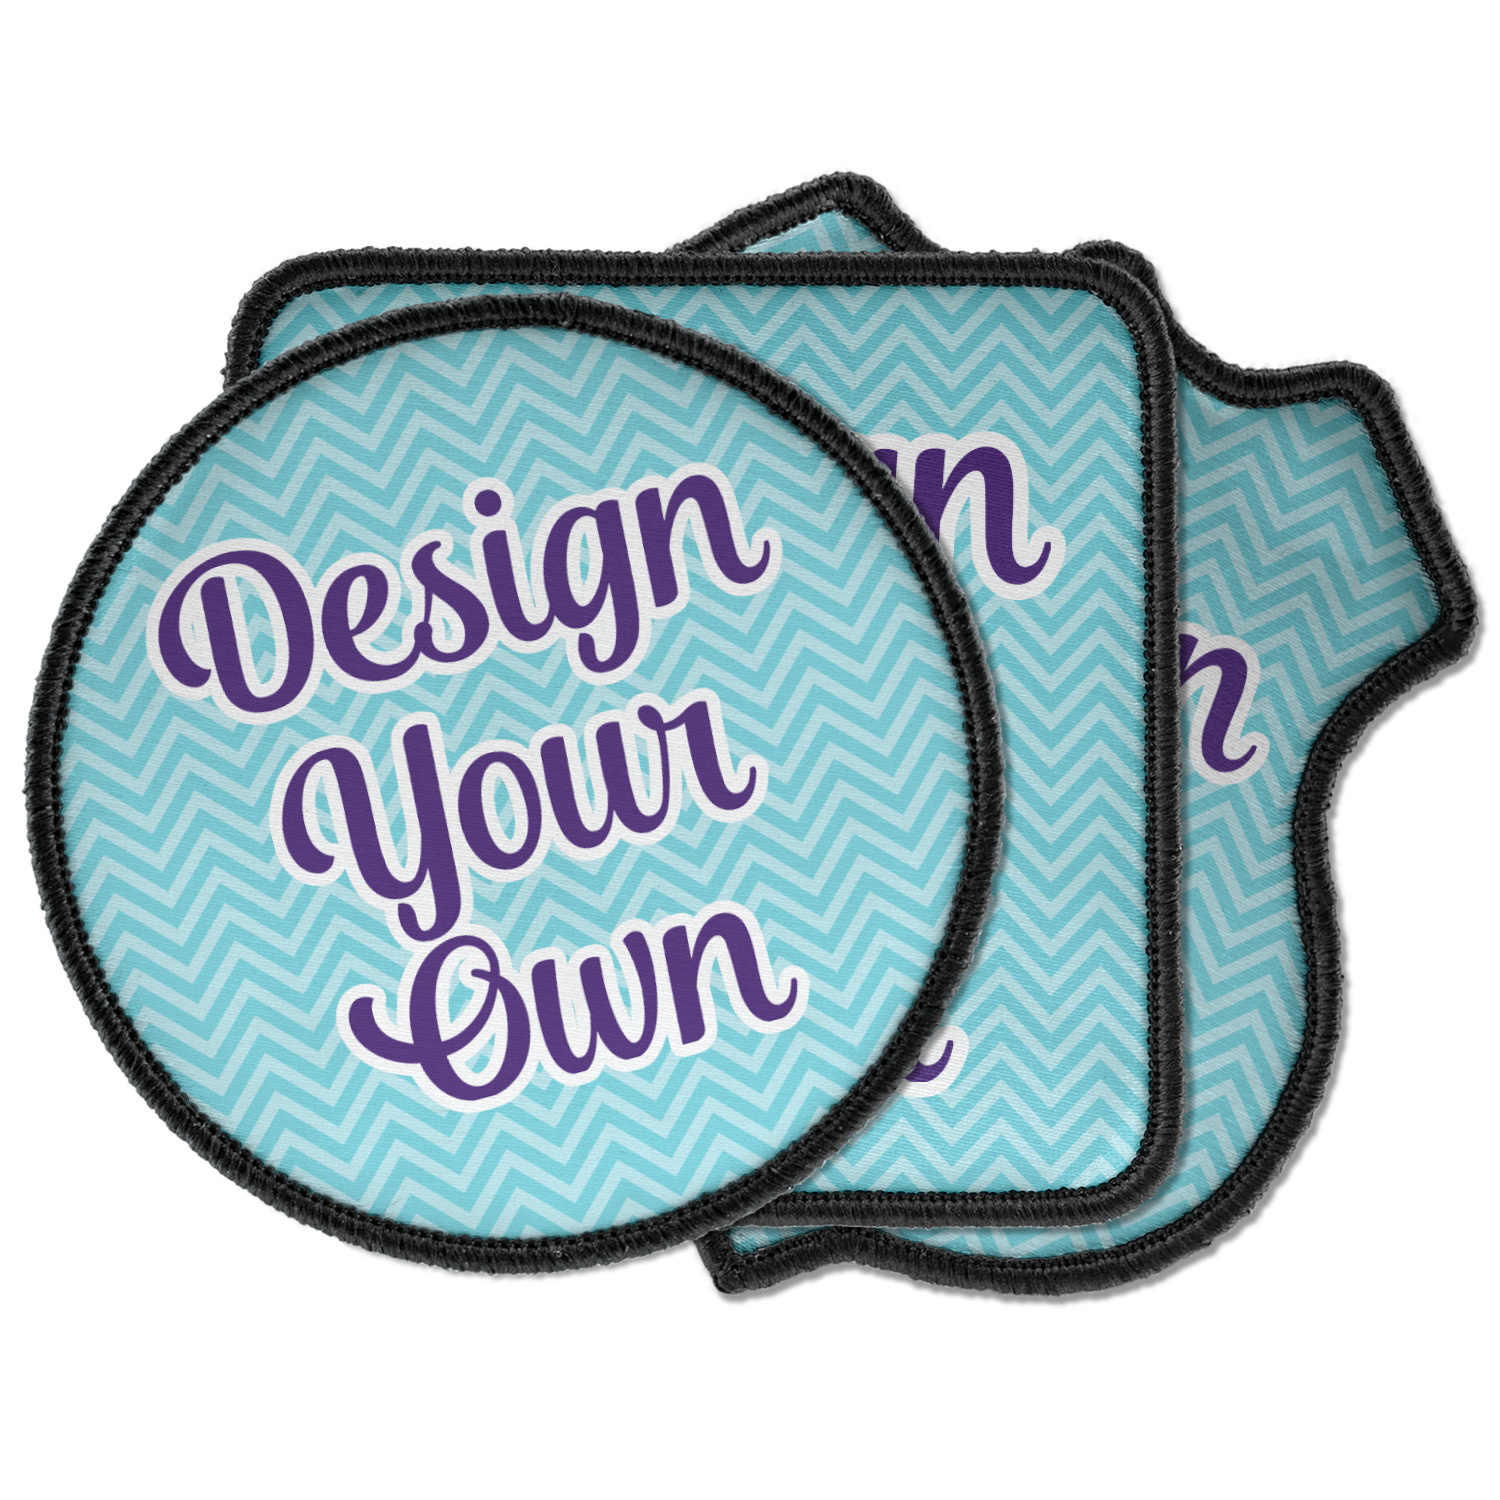 Custom Iron On Patches with High Quality Designer Iron On Patche